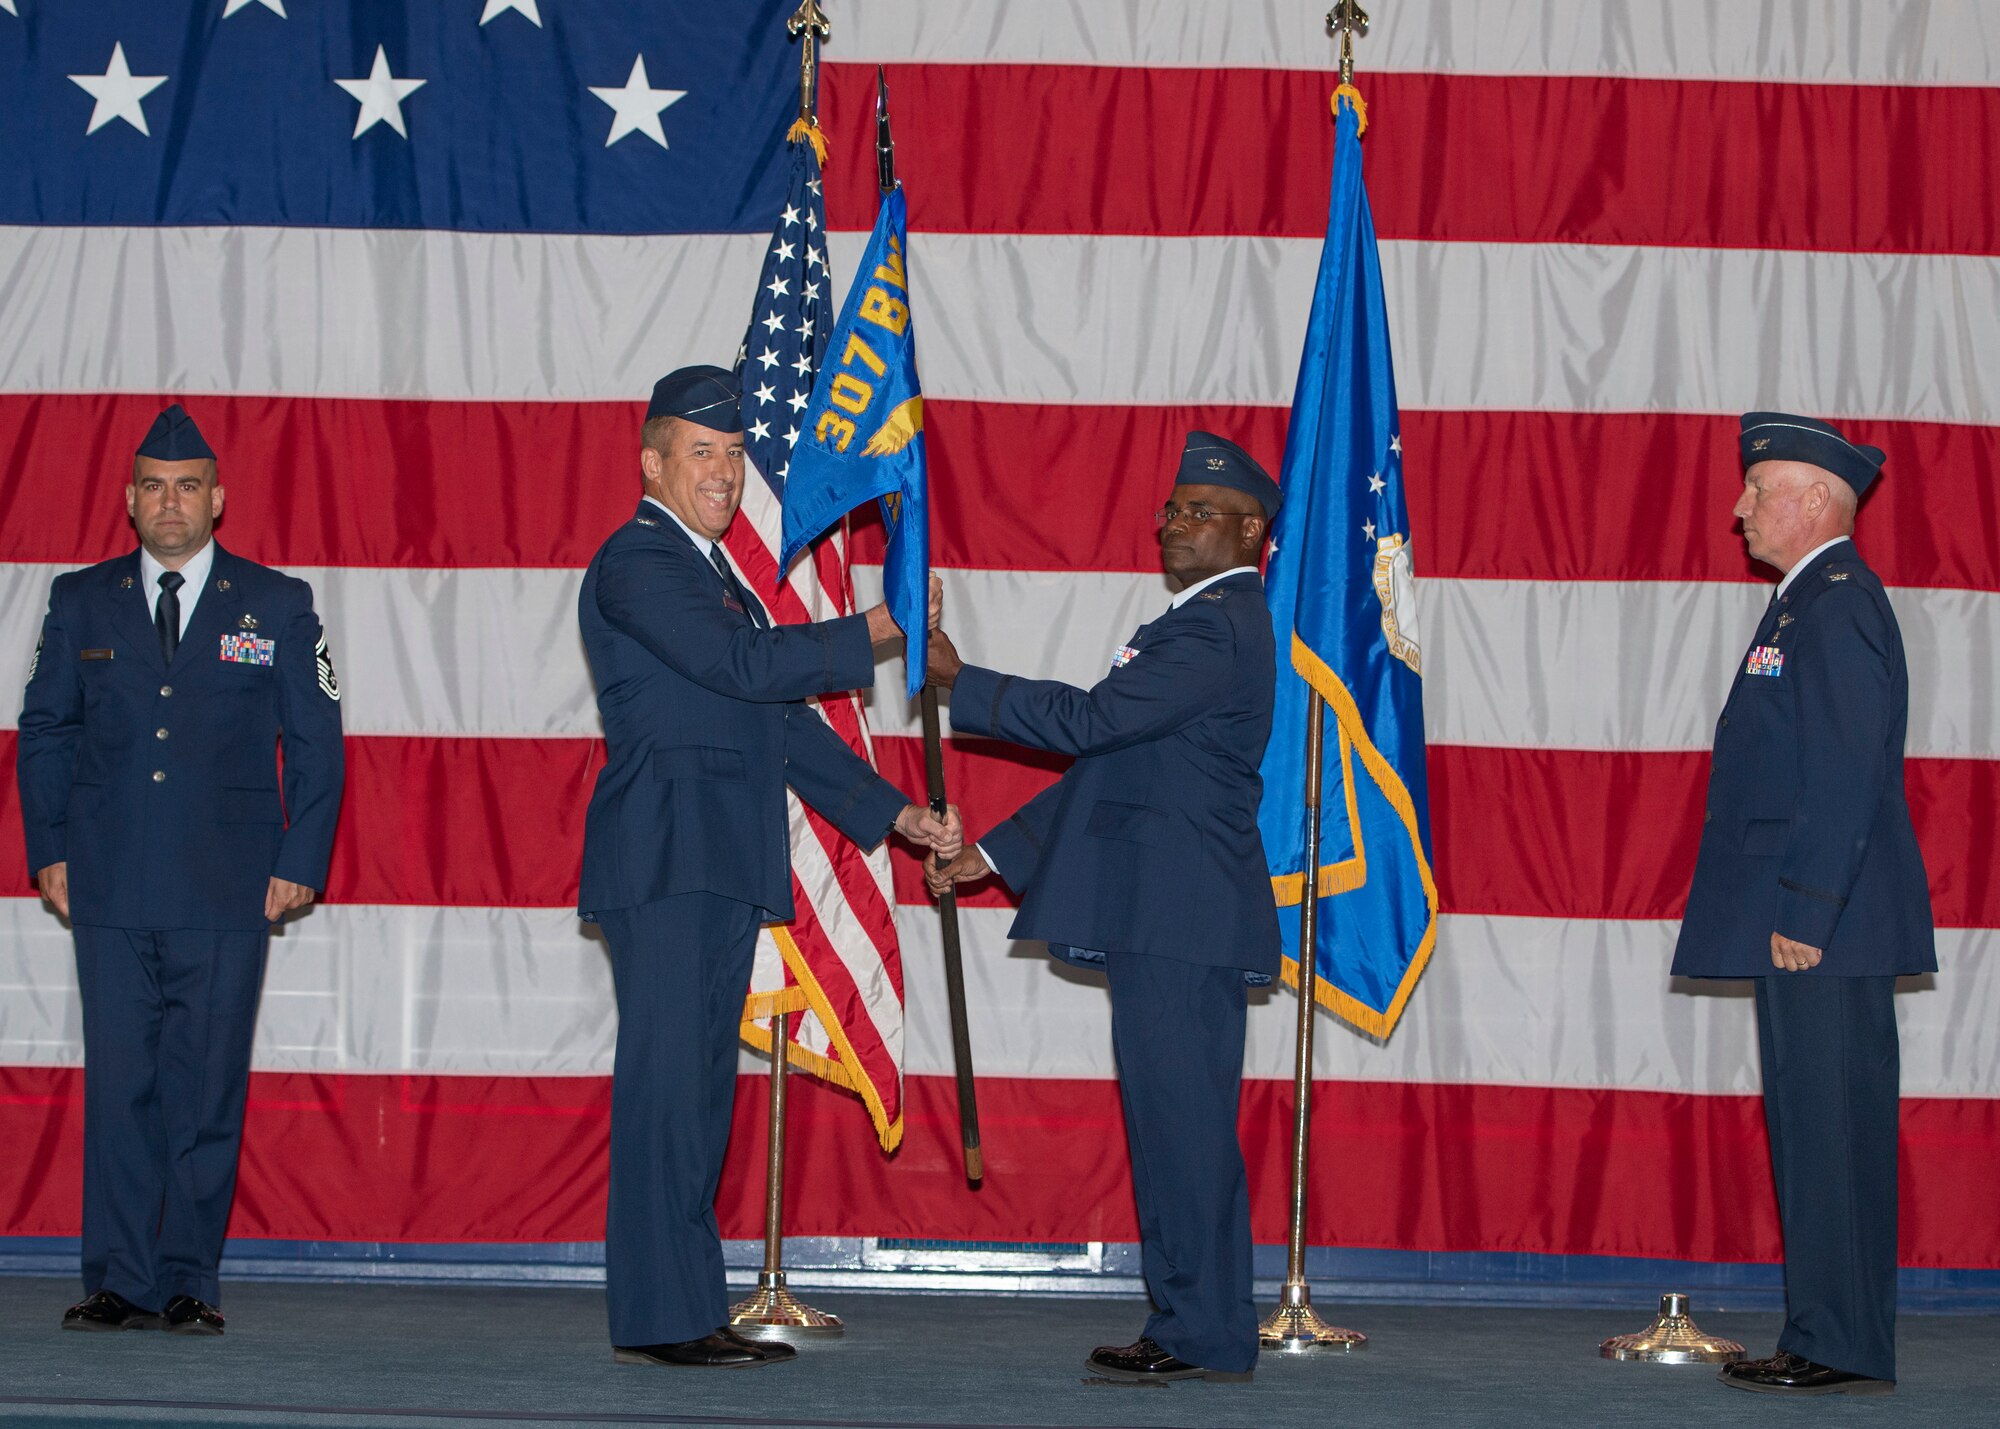 U.S. Air Force Col. Dennis Britten took command of the 307th Medical Squadron during a ceremony at Barksdale Air Force Base, Louisiana, September 7, 2019. Britten has been assigned to the 307th MDS and it's predecessor, the 917th MDS, since he commissioned in 2019. The 307th Medical Squadron provides the medical care the Reserve Citizen Airmen of the 307th Bomb Wing require to be "fit to fight."